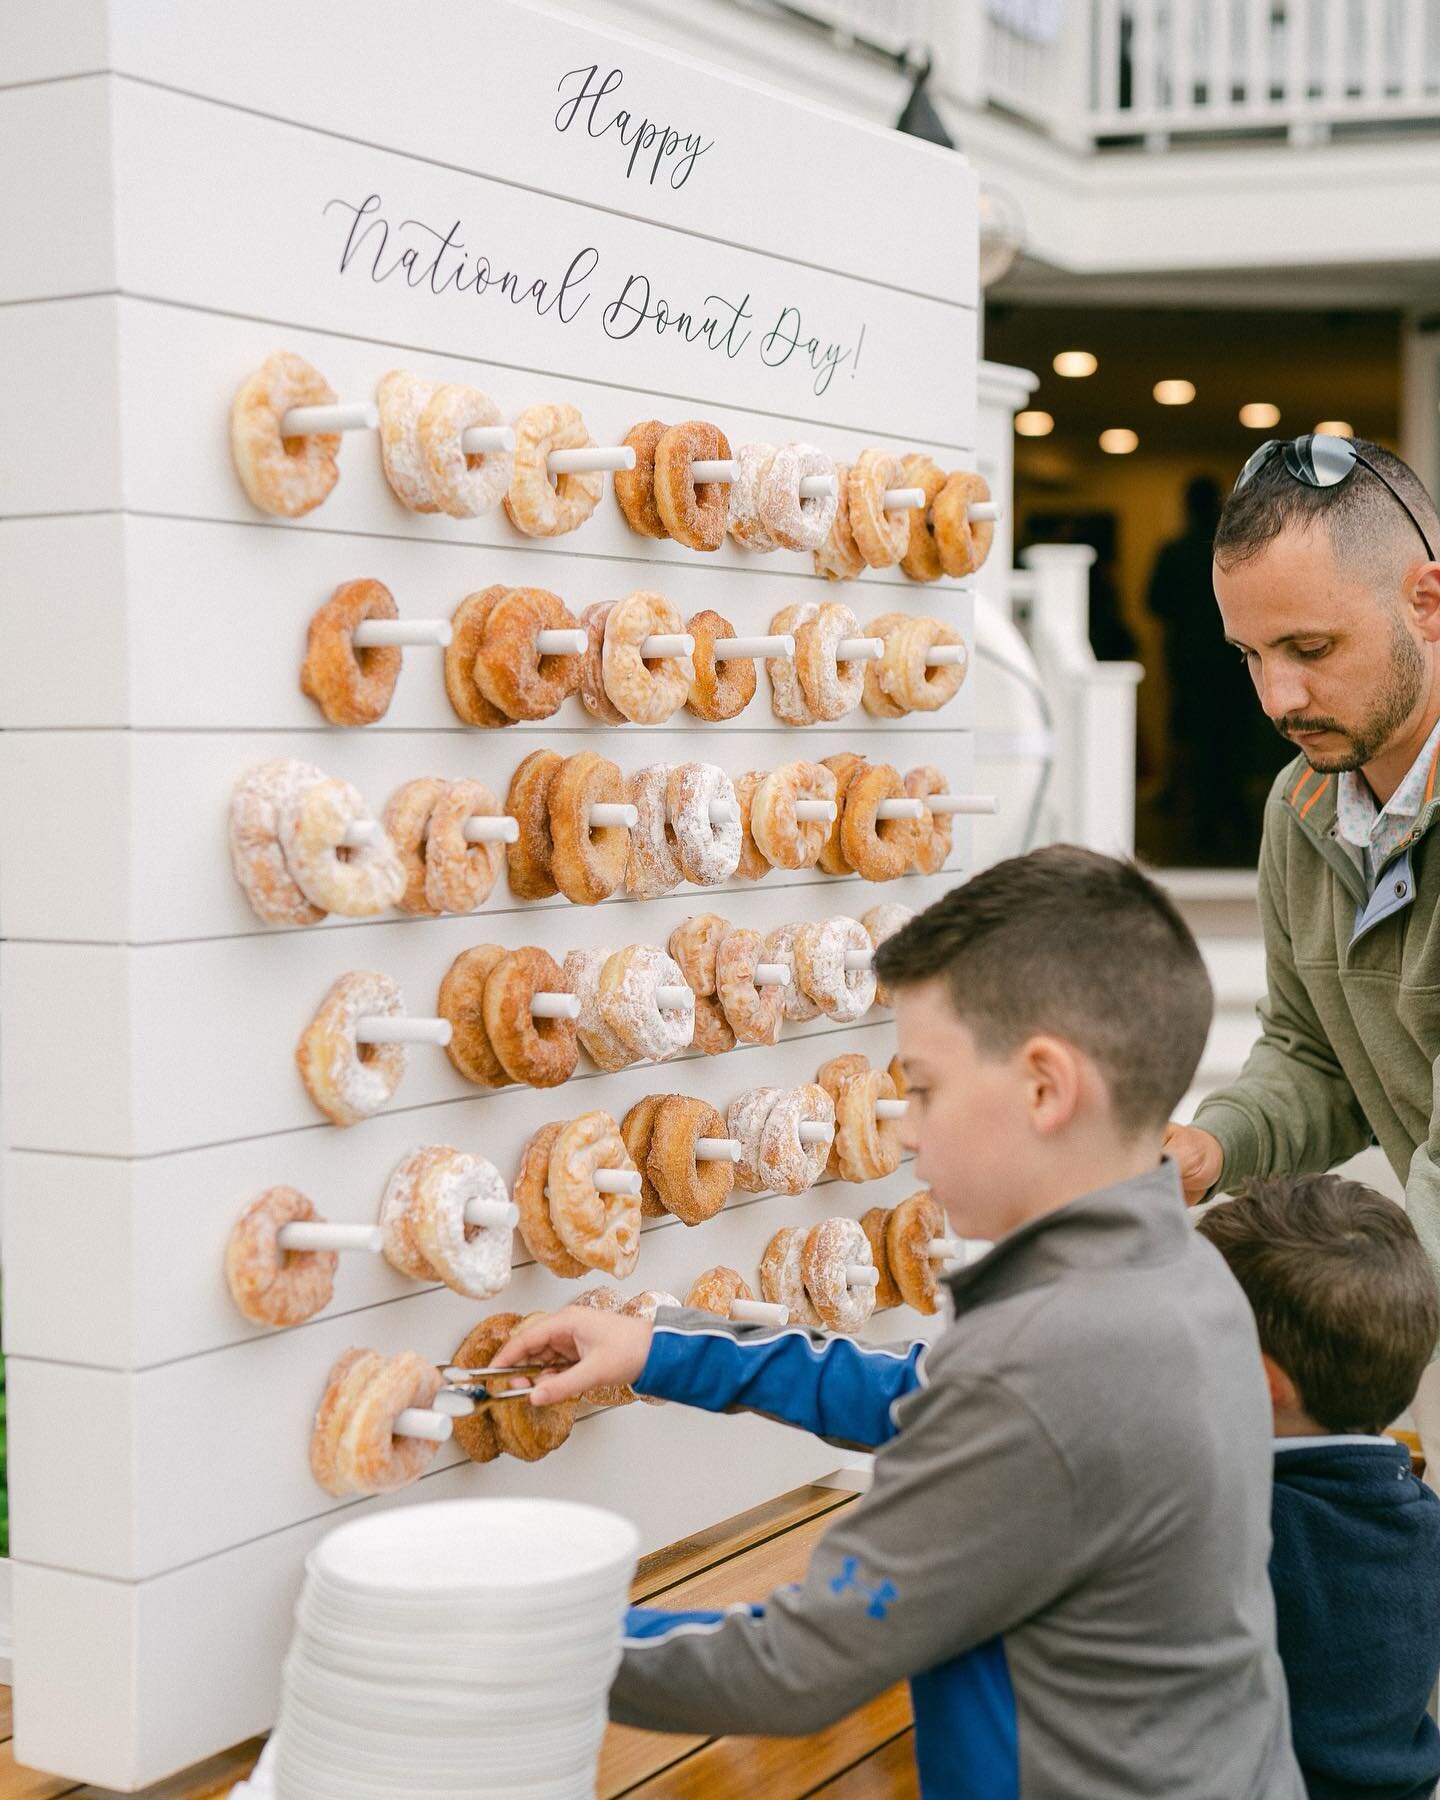 Did you know there&rsquo;s a National Donut Day? Our couple capitalized on the occasion and used our &ldquo;Tommy&rdquo; backdrop as a welcome for their wedding guests. We love the layered donut look!

Photo // @abbietylerphoto